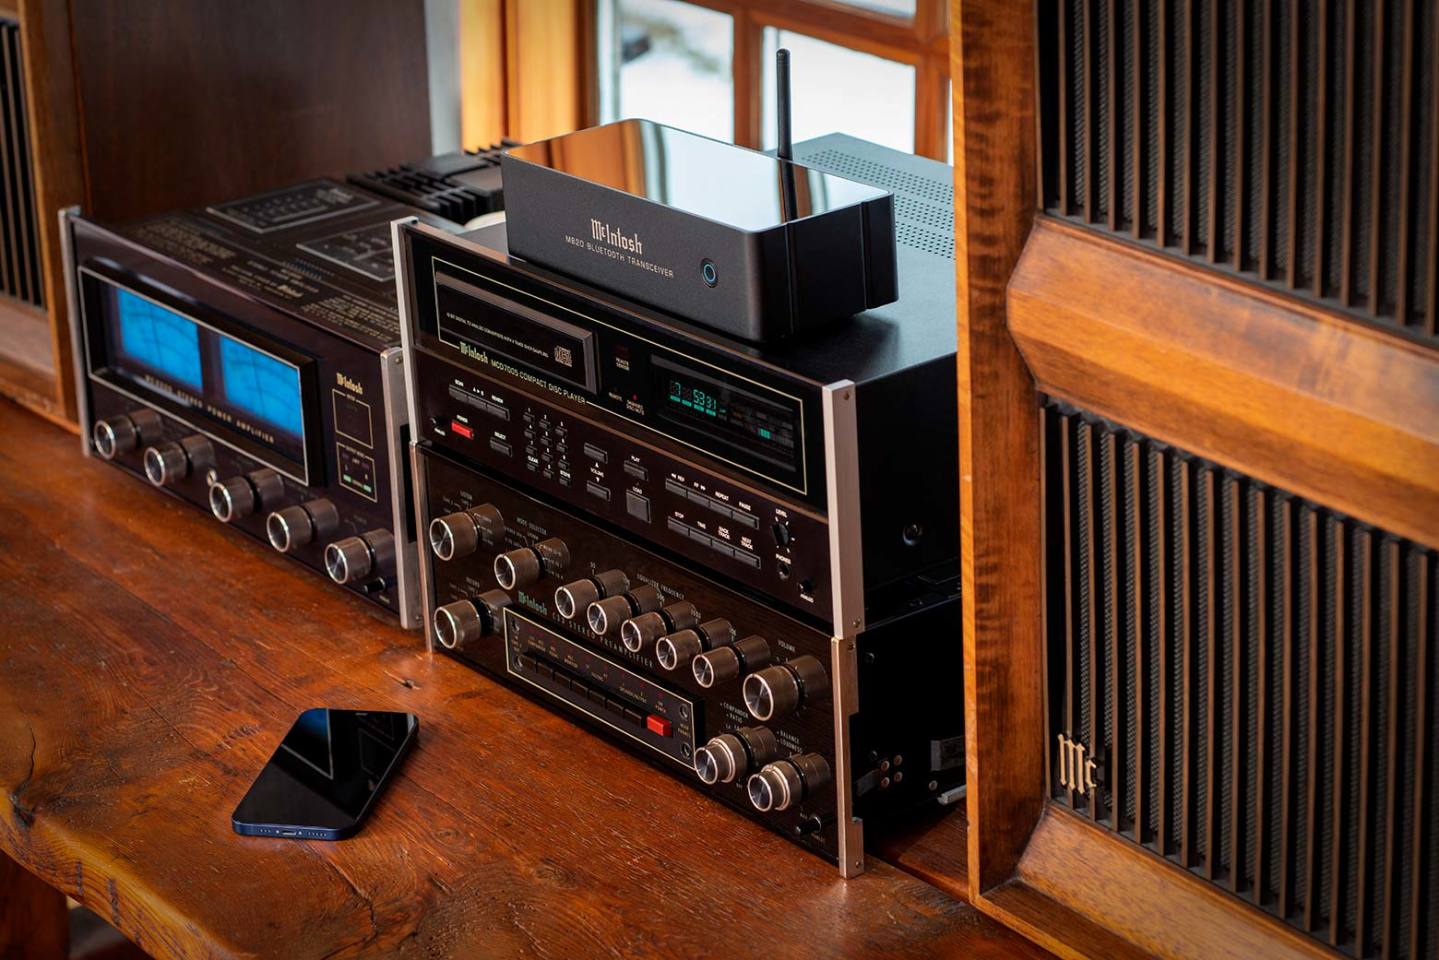 The MB20 is not just compatible with McIntosh audio gear, but could bring Bluetooth capabilities to legacy hi-fi gear from other manufacturers too